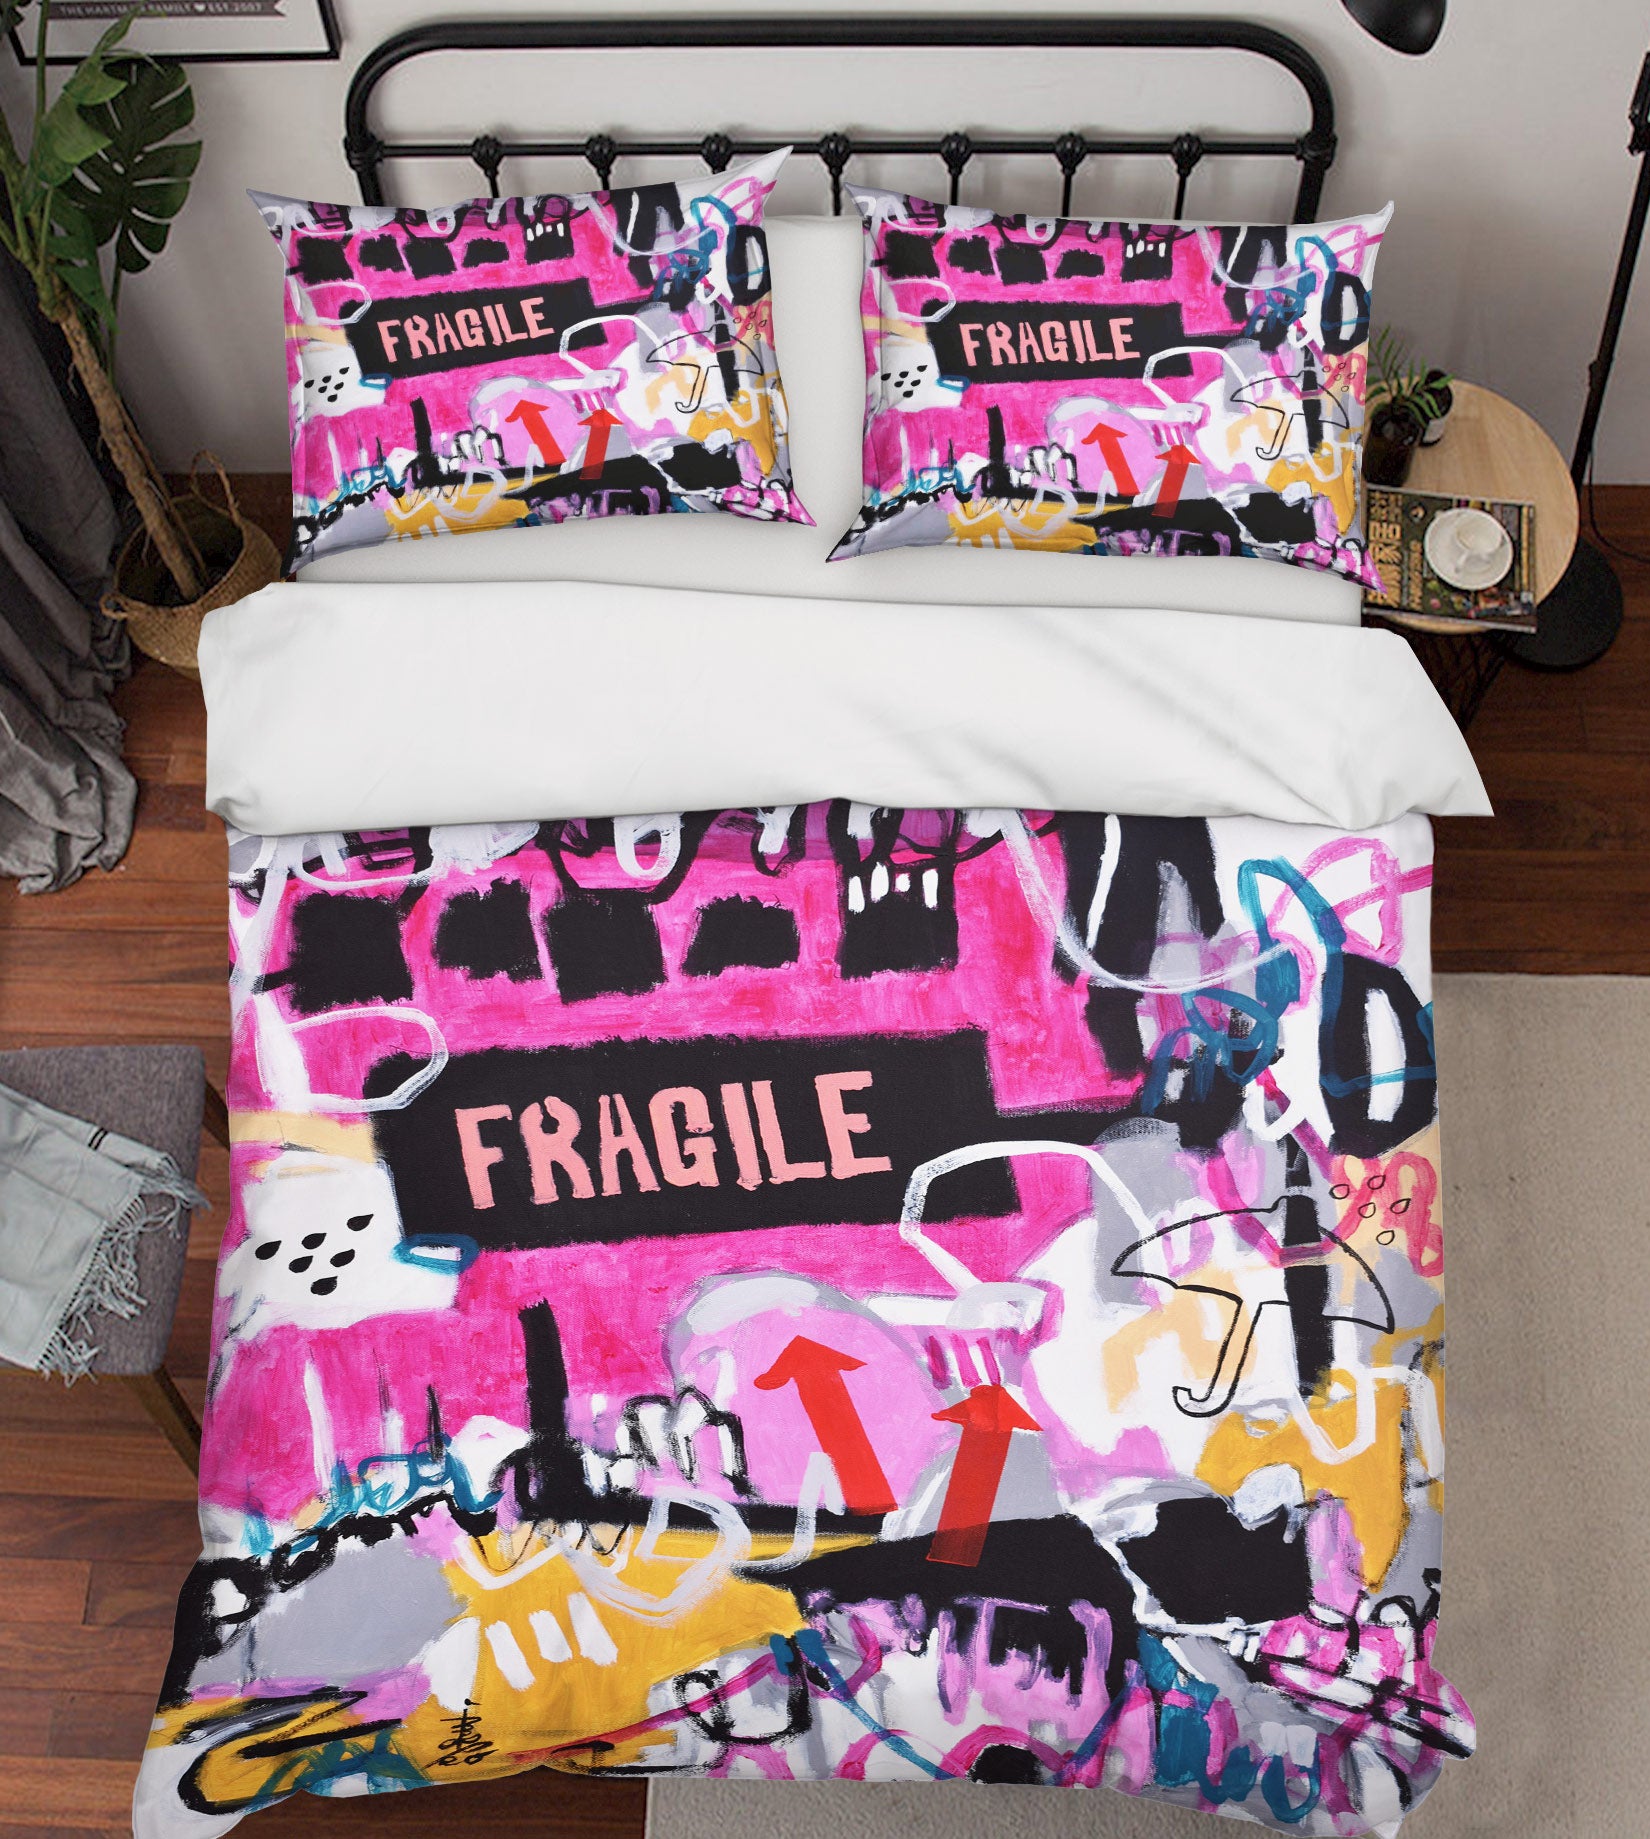 3D Doodle Pink Painting 1150 Misako Chida Bedding Bed Pillowcases Quilt Cover Duvet Cover